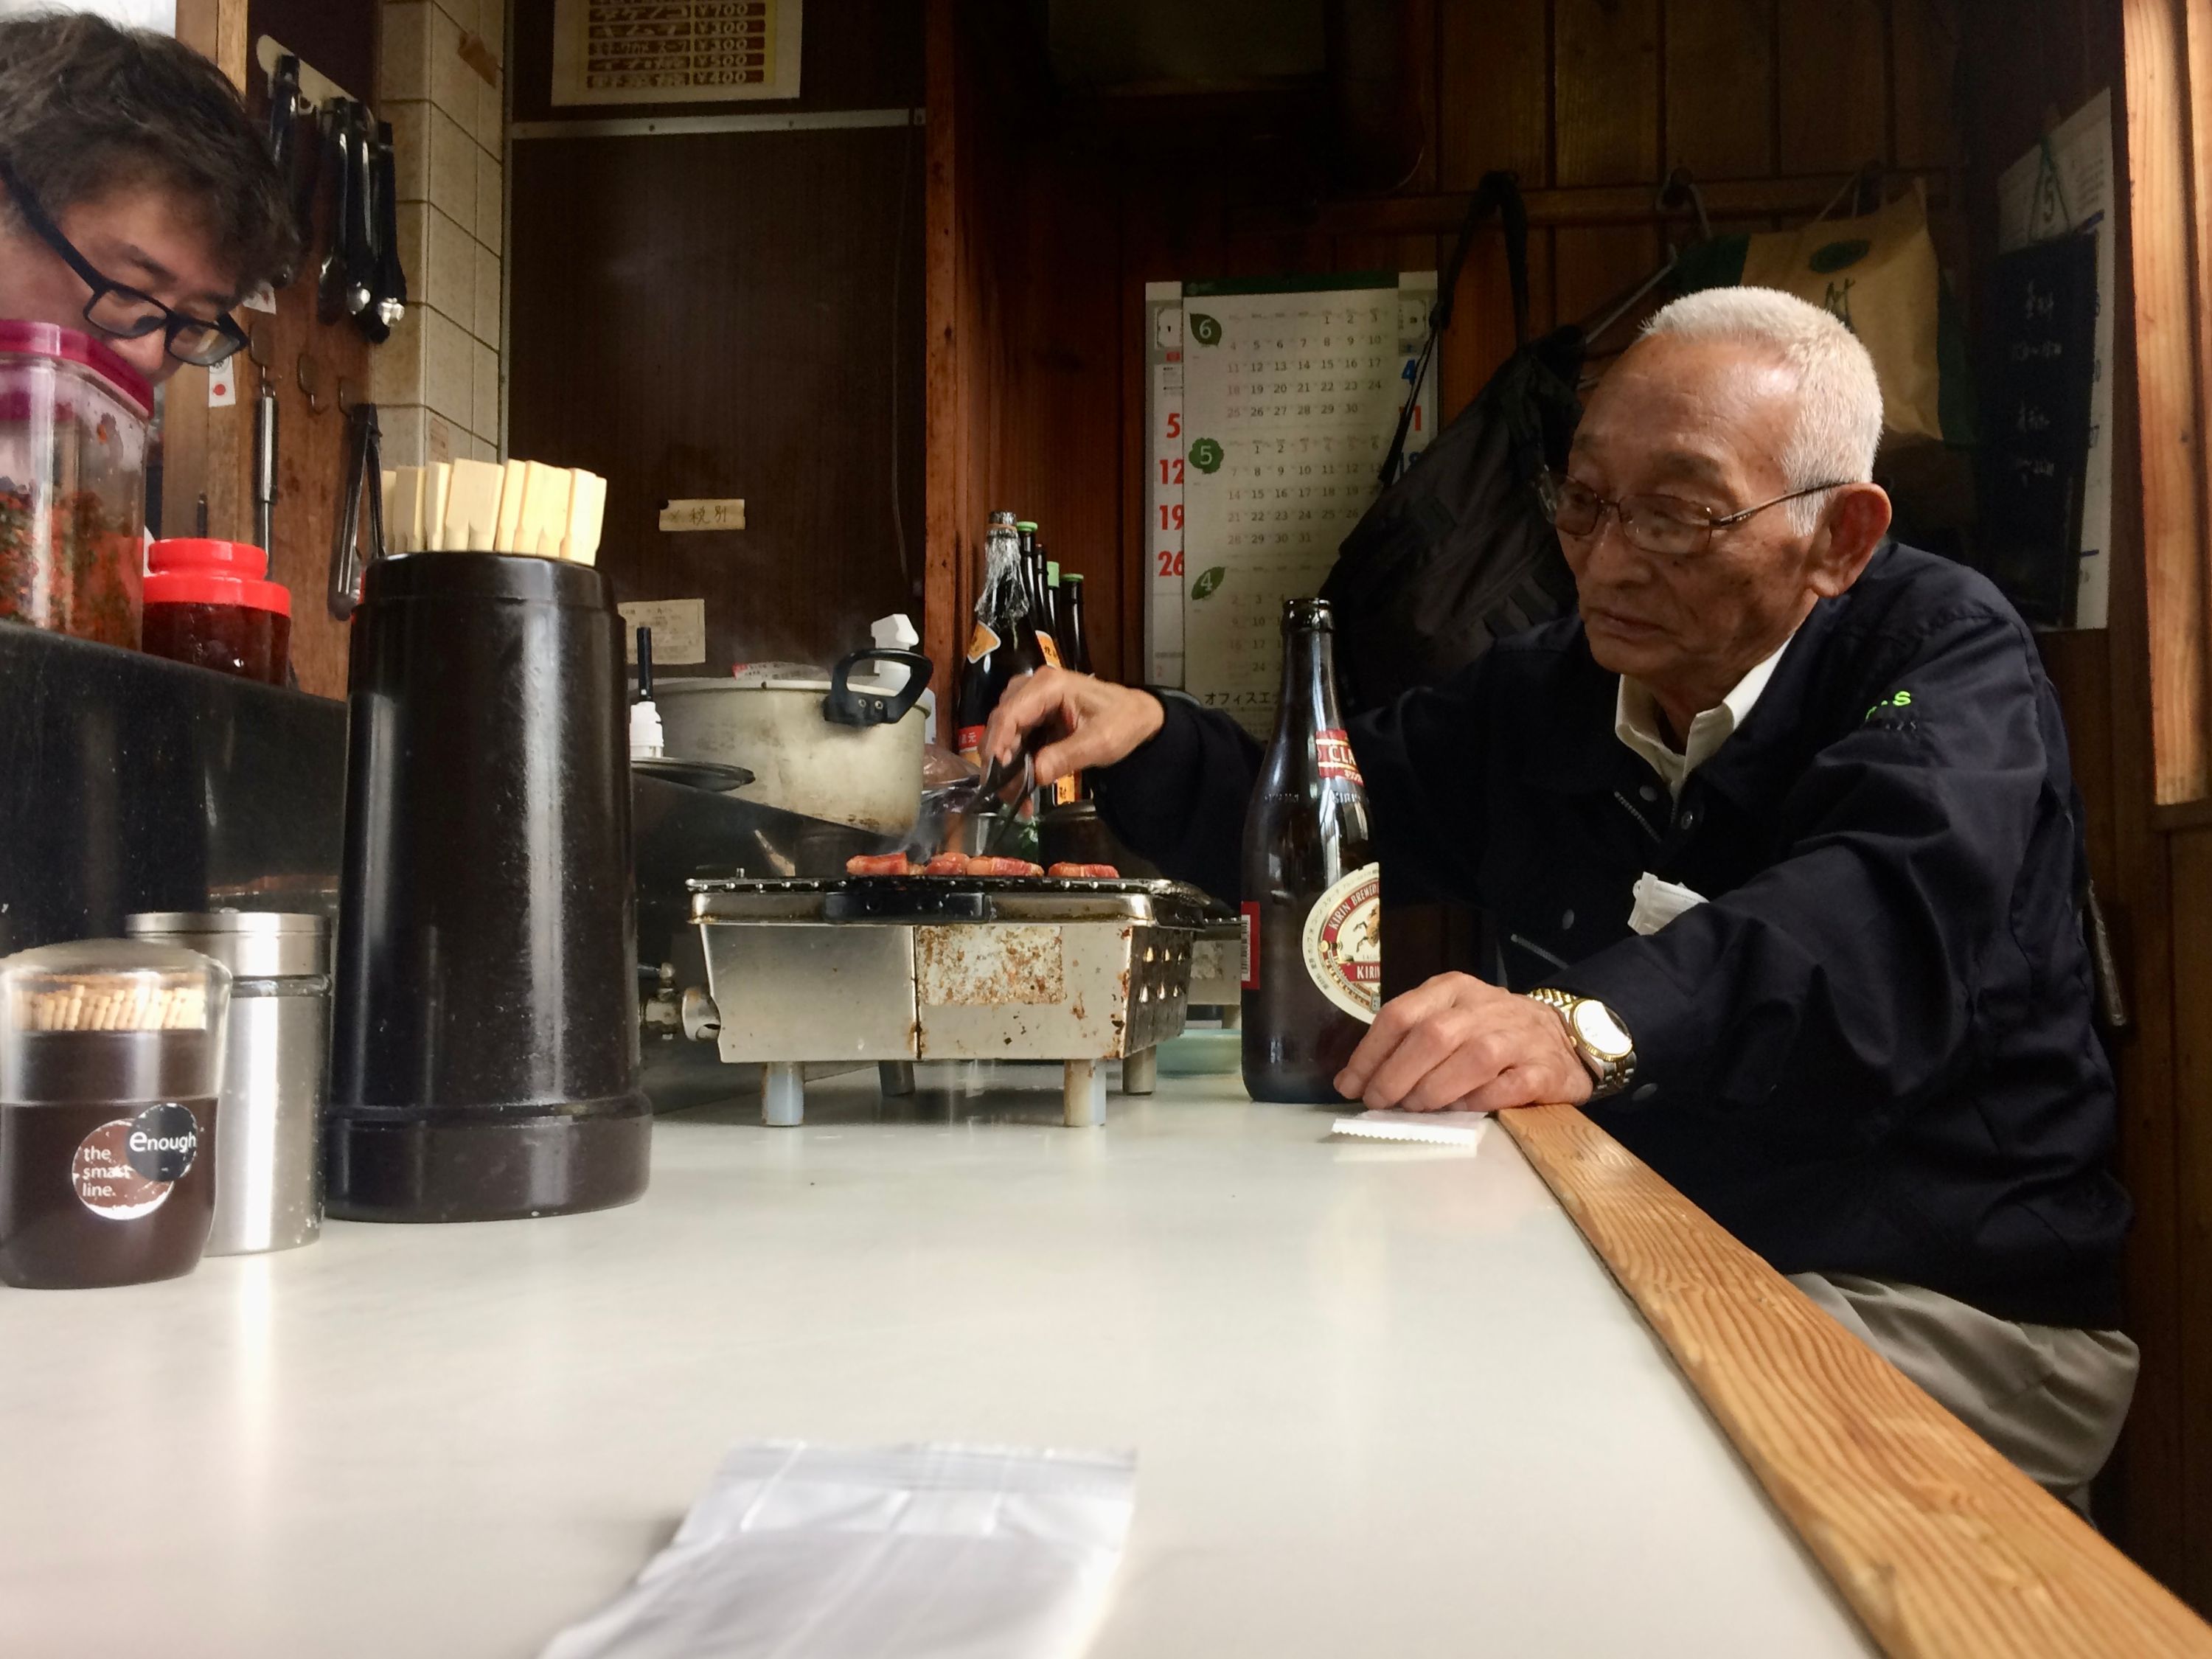 An elderly Japanese man grills pieces of Kōbe beef on the counter of a small restaurant, a bottle of beer near his left hand.